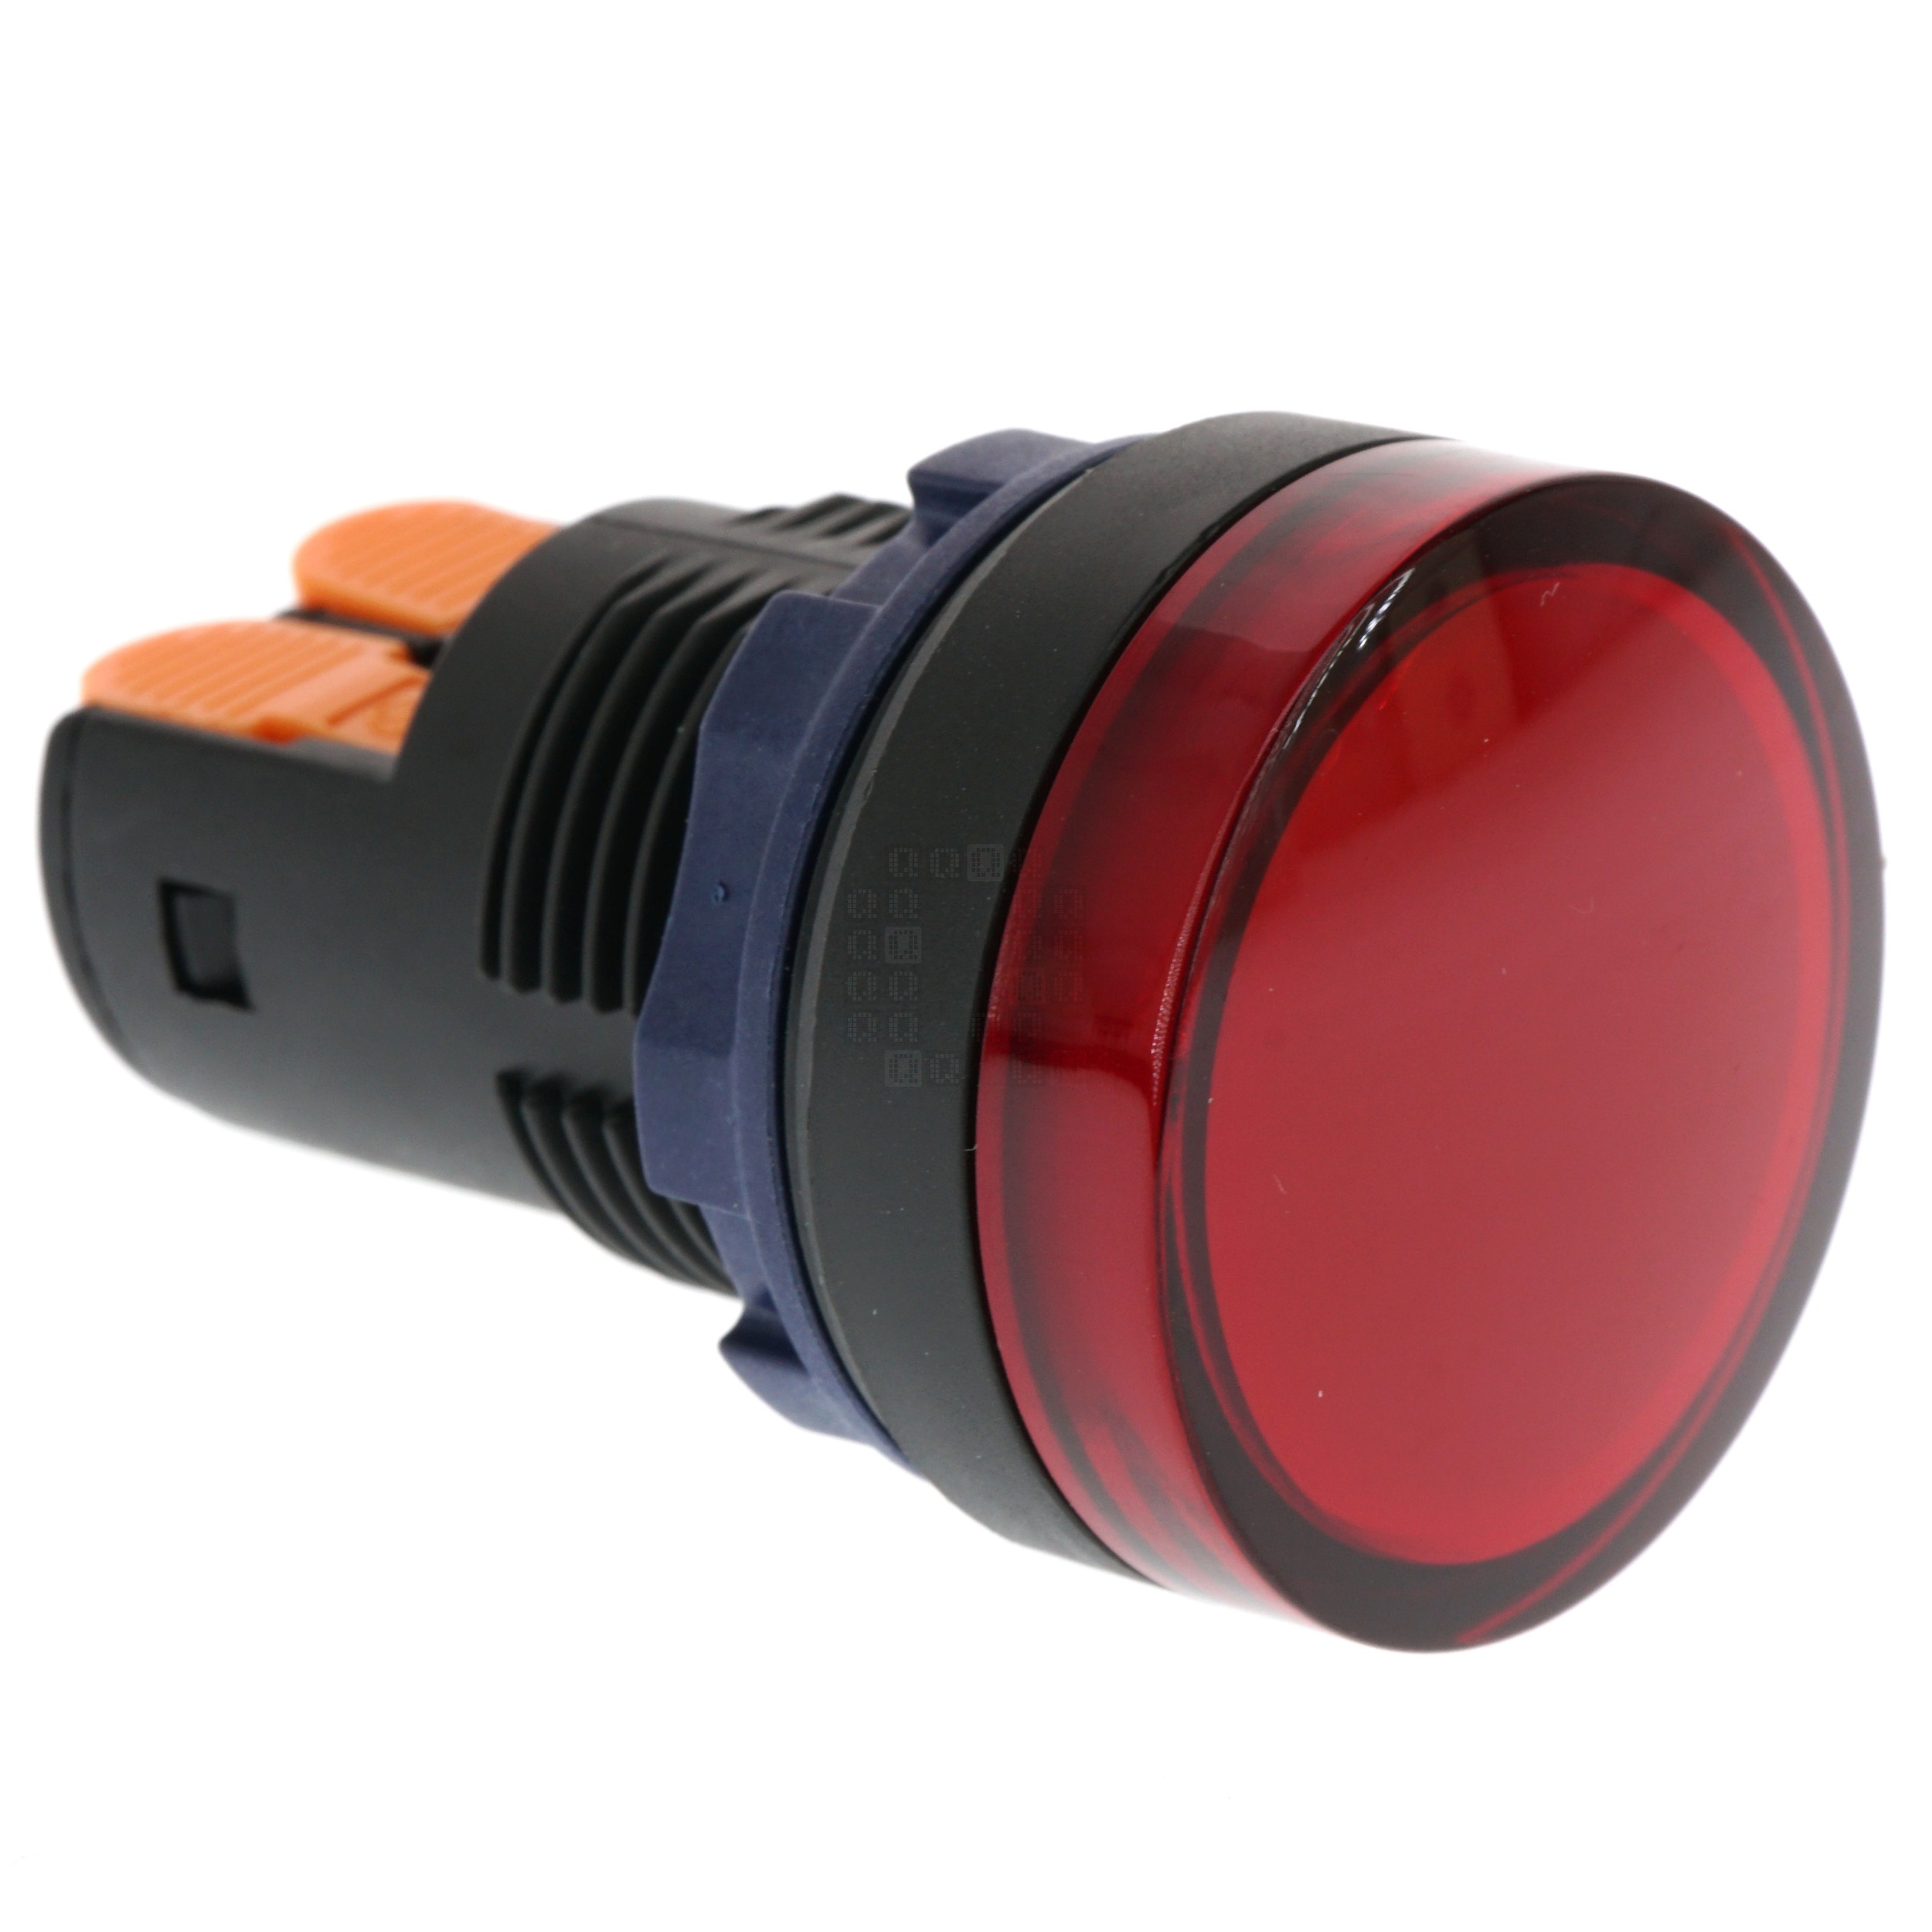 22mm Indicator Light, Red LED, 9-24V, Red Diffused Flat Head, Black Ring